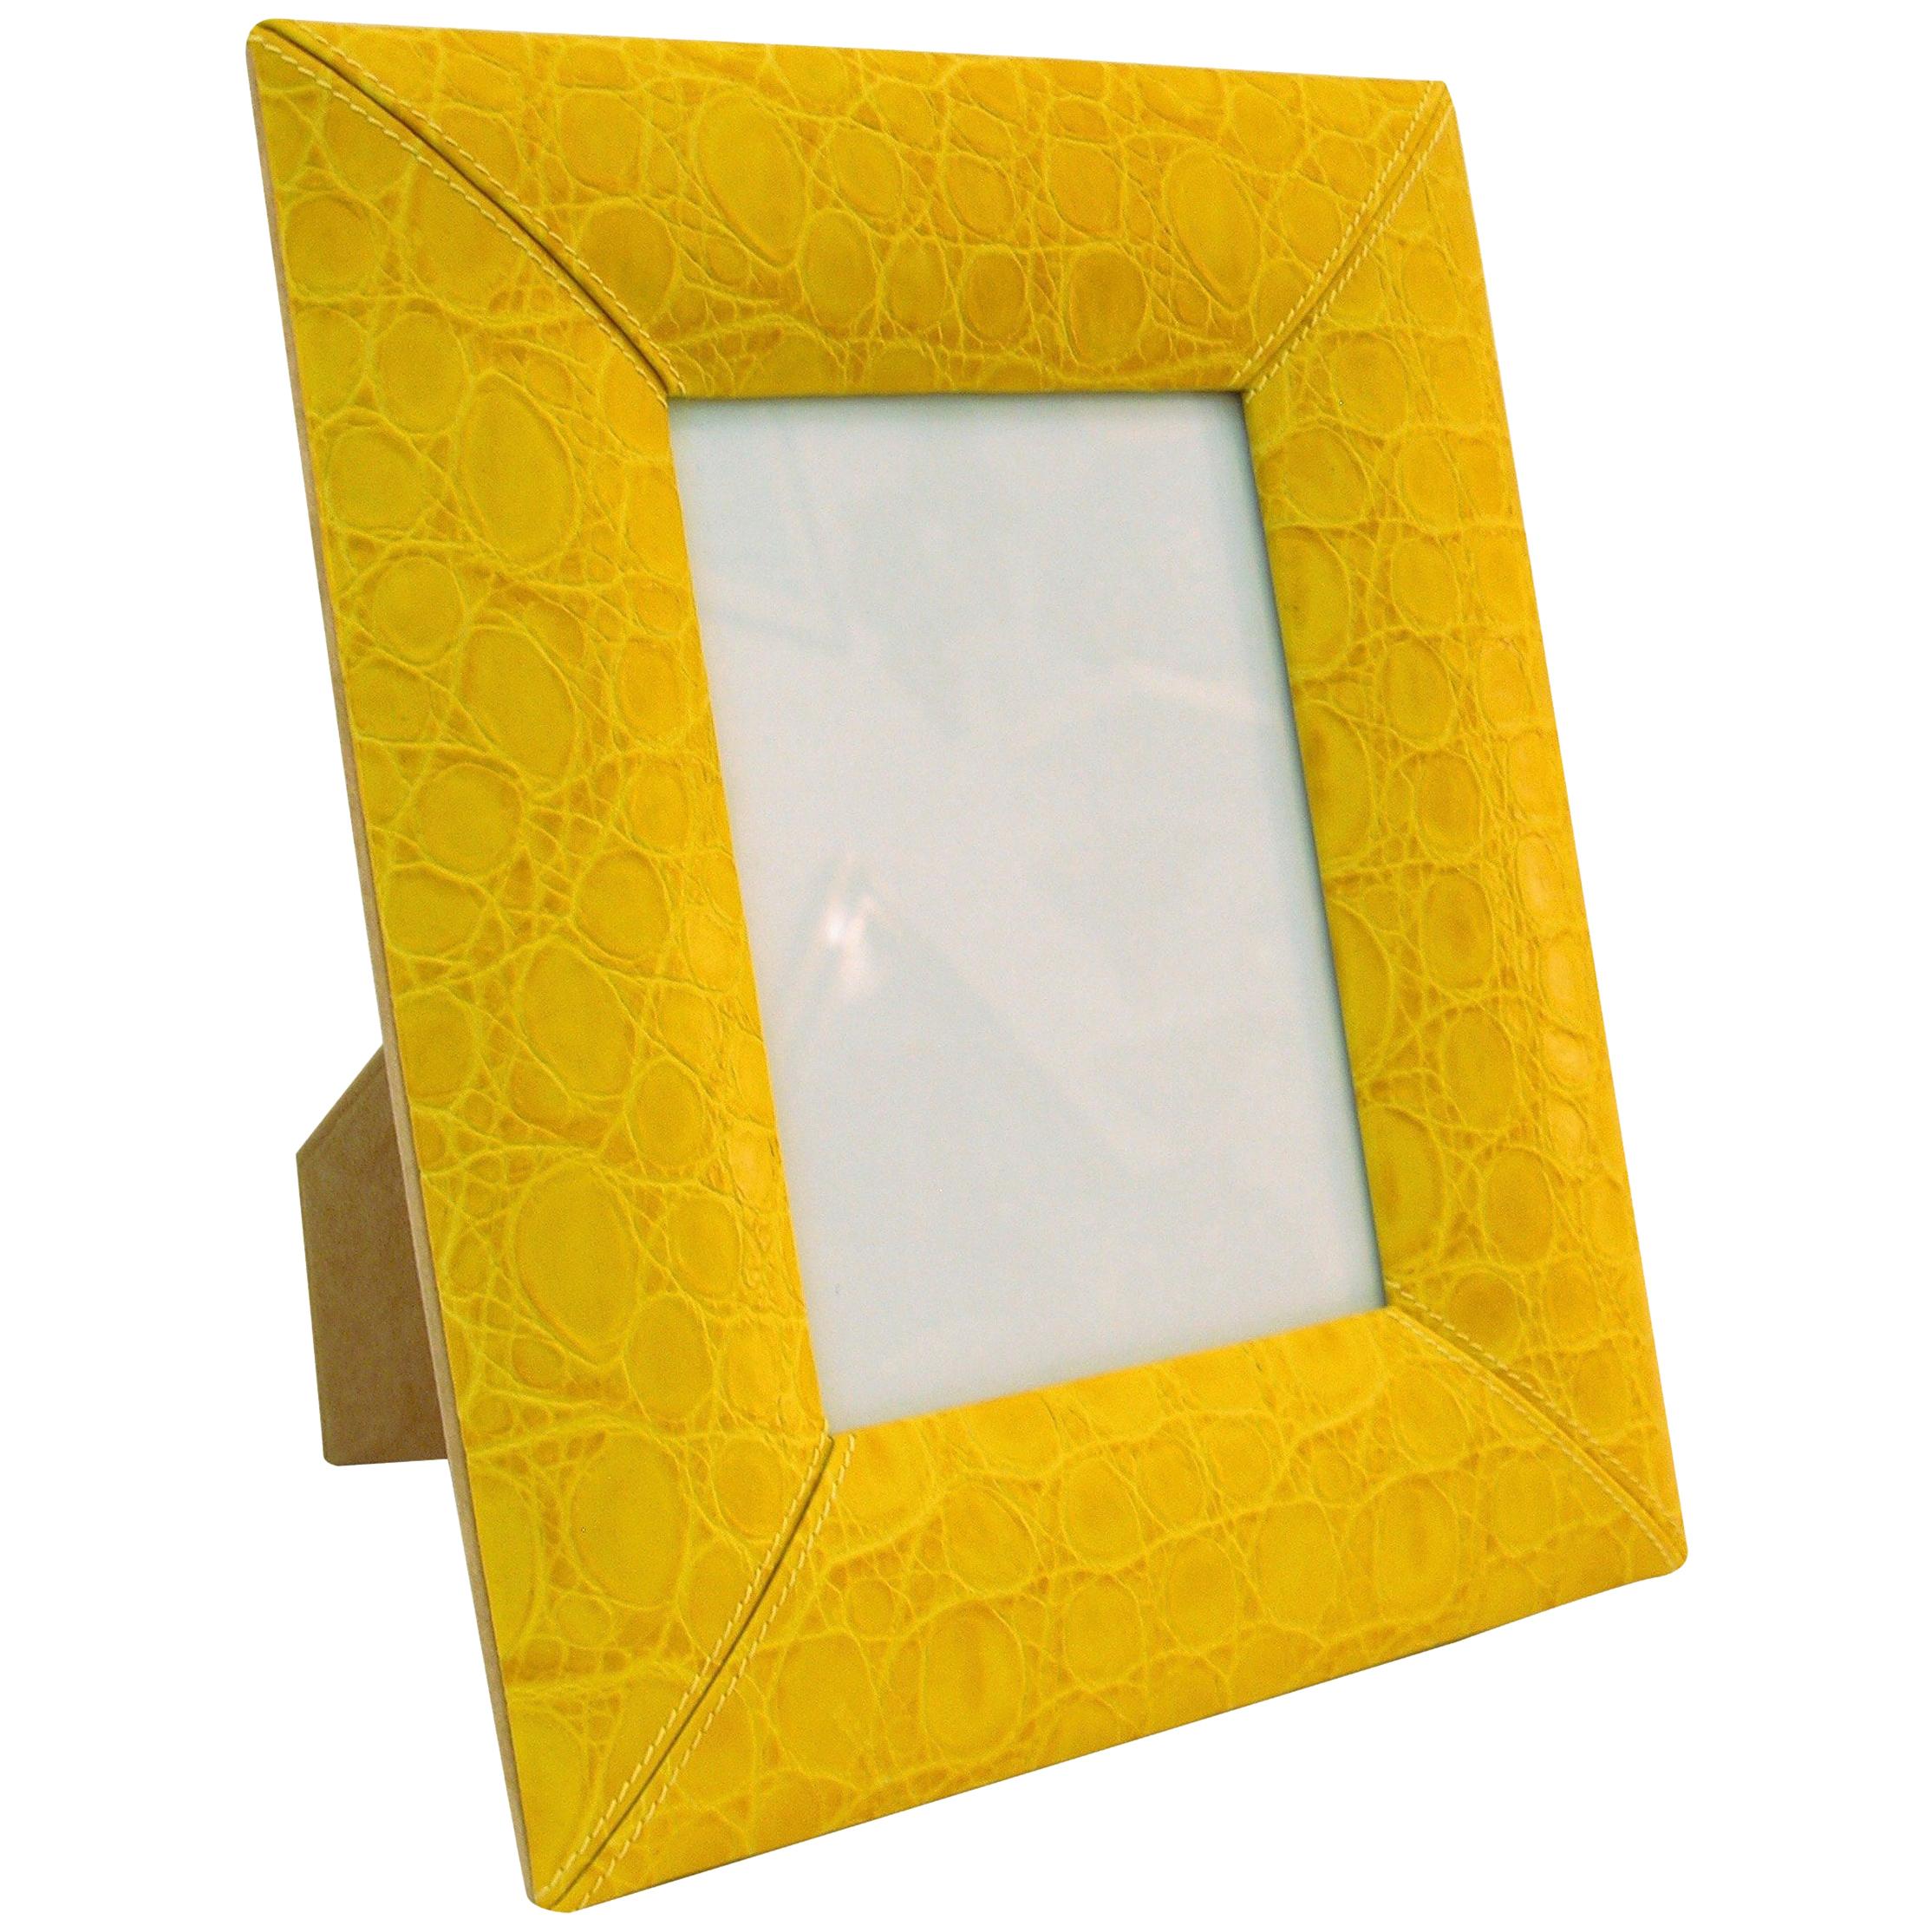 1990s Paciotti Italian Couture Yellow Embossed Leather Fashion Photo Frame